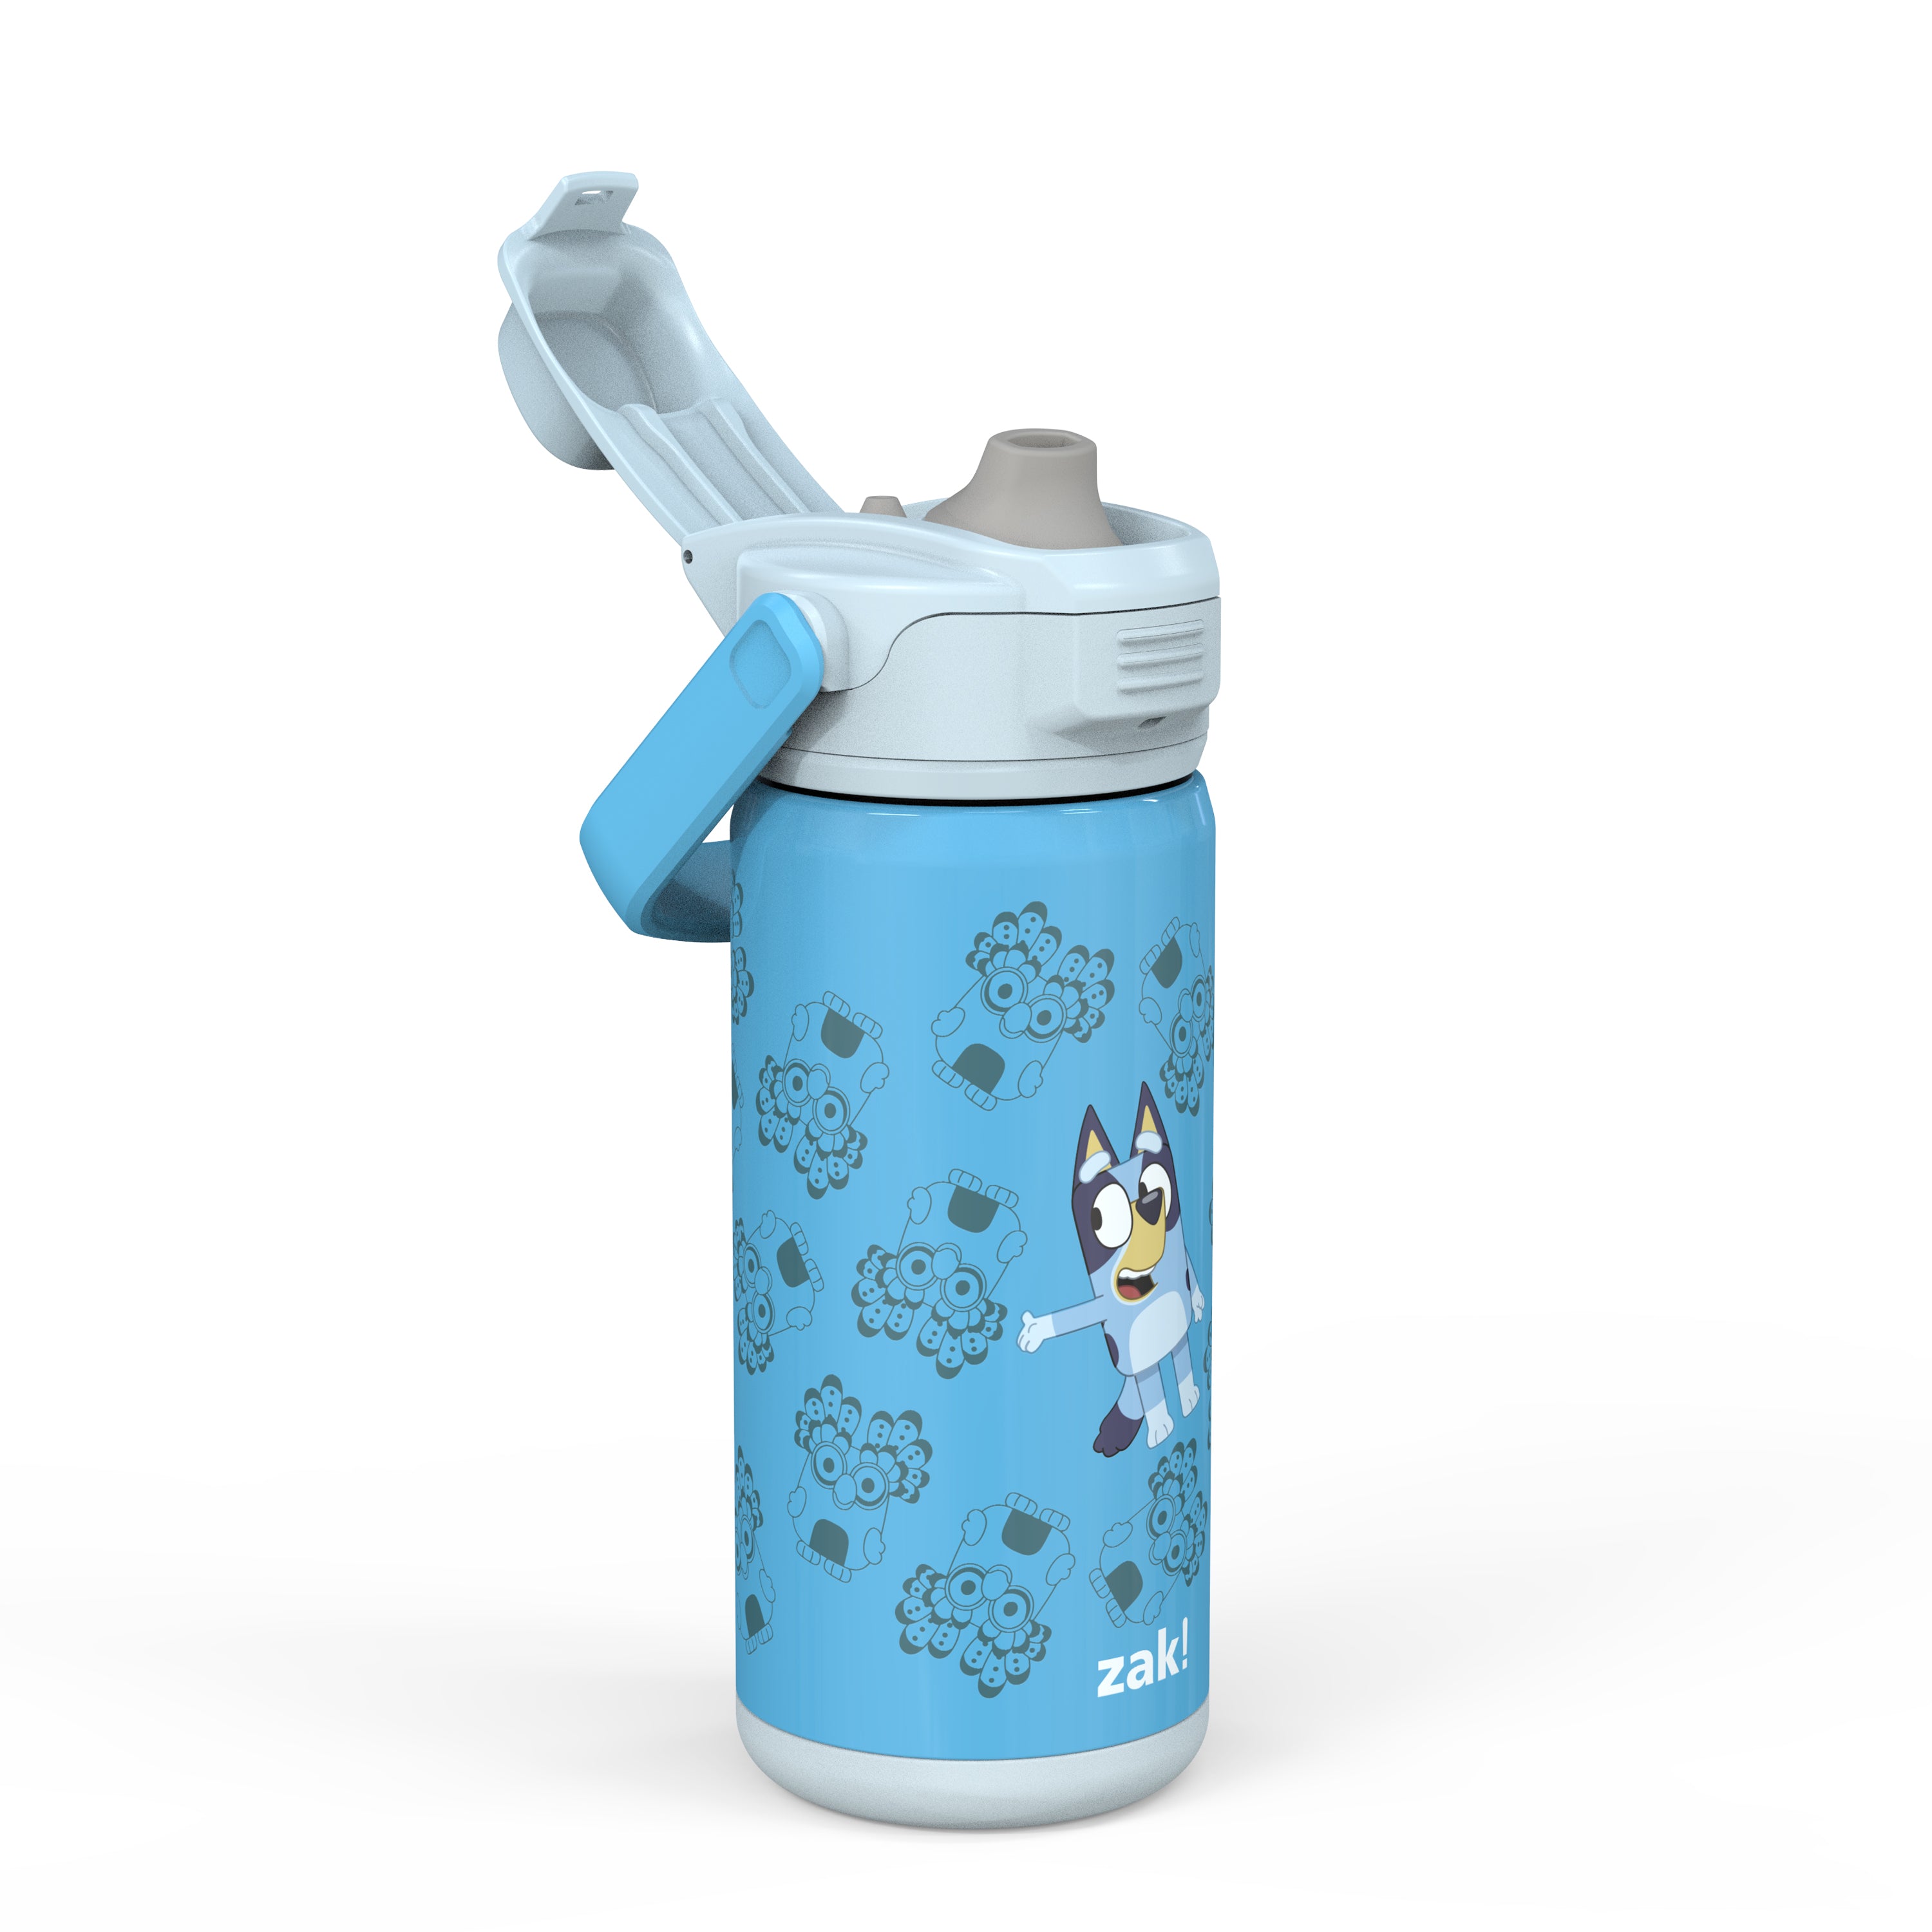 Bluey Beacon Stainless Steel Insulated Kids Water Bottle with Covered Spout, 14 Ounces